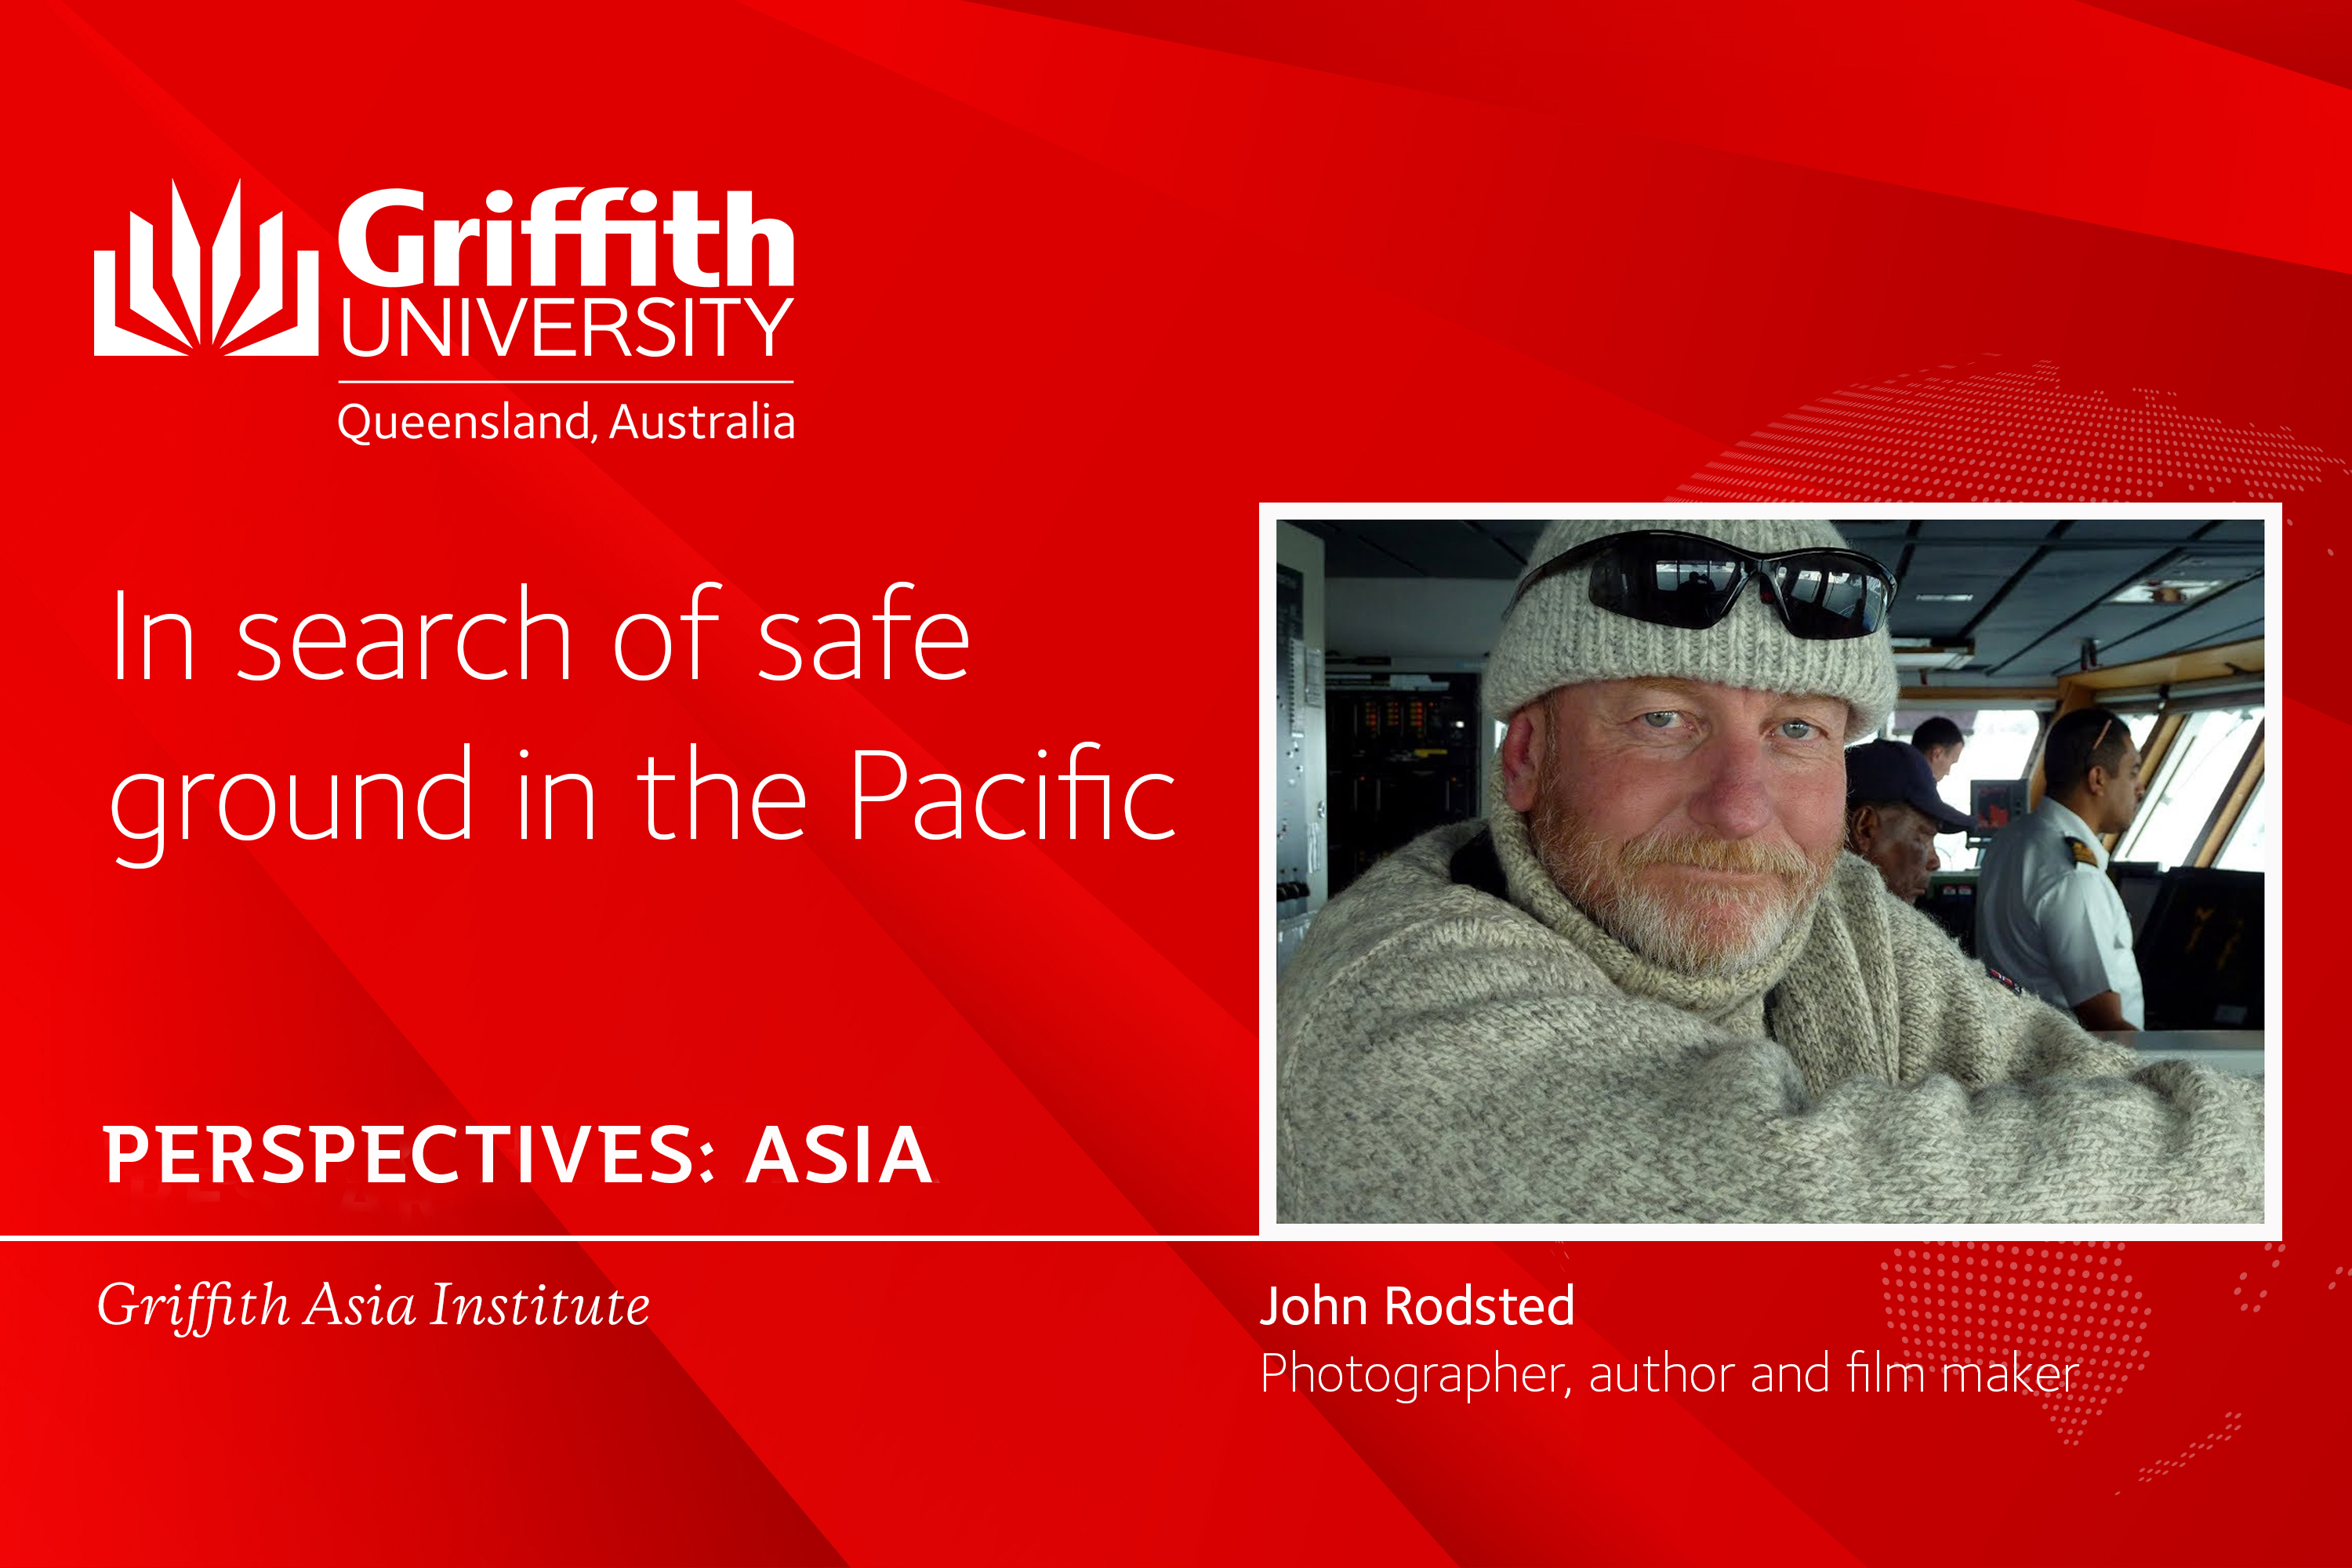 Perspectives:Asia  |  In search of safe ground in the Pacific